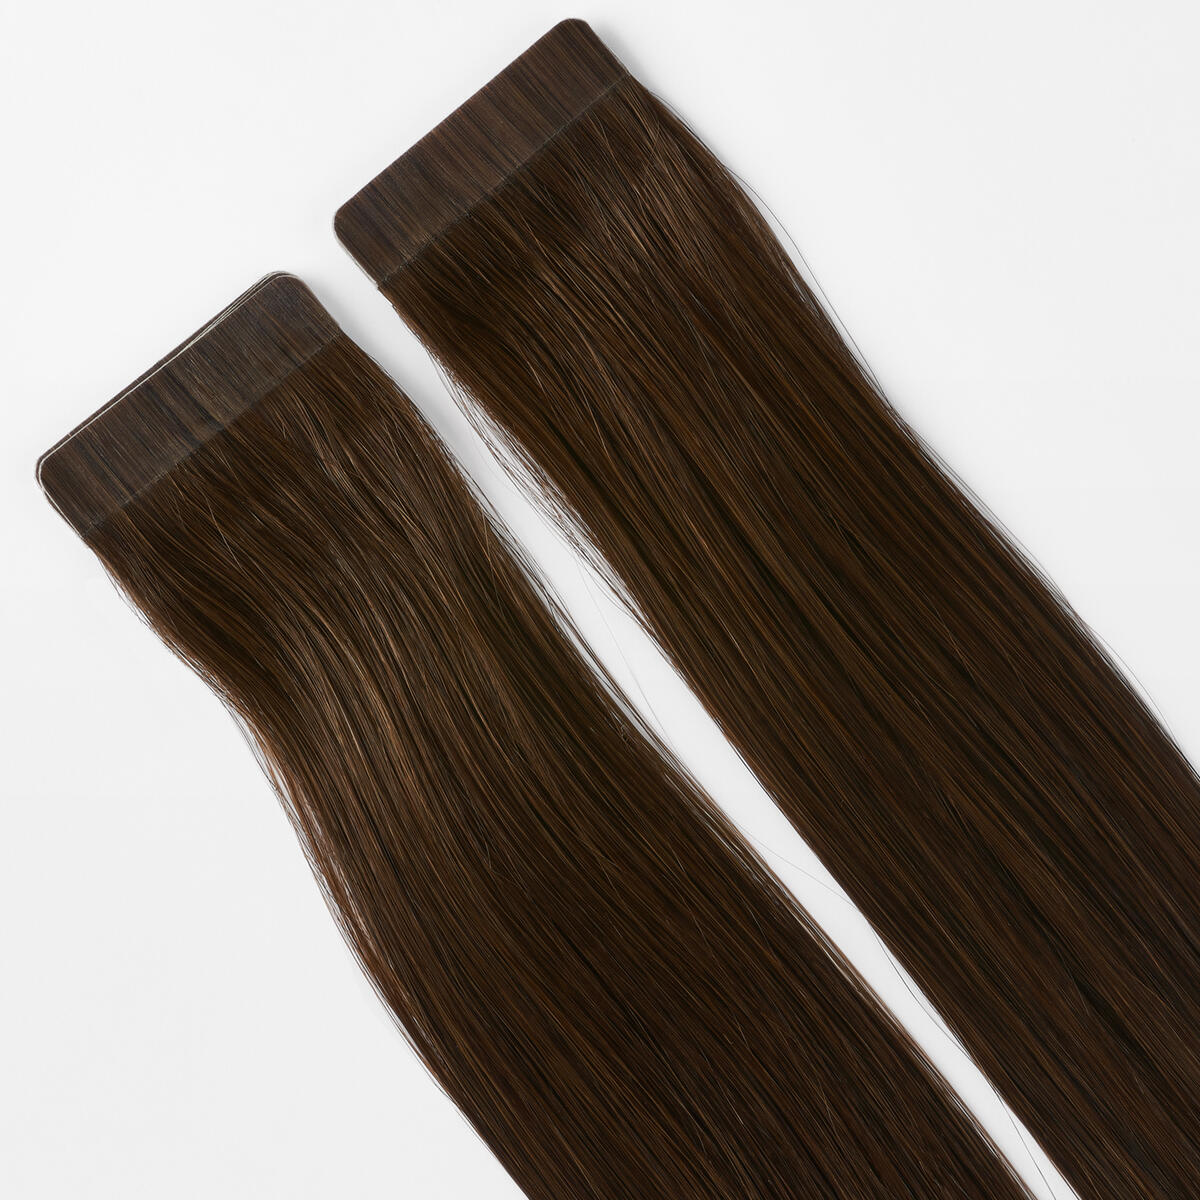 Basic Tape Extensions Classic 4 2.2 Coffee Brown 60 cm